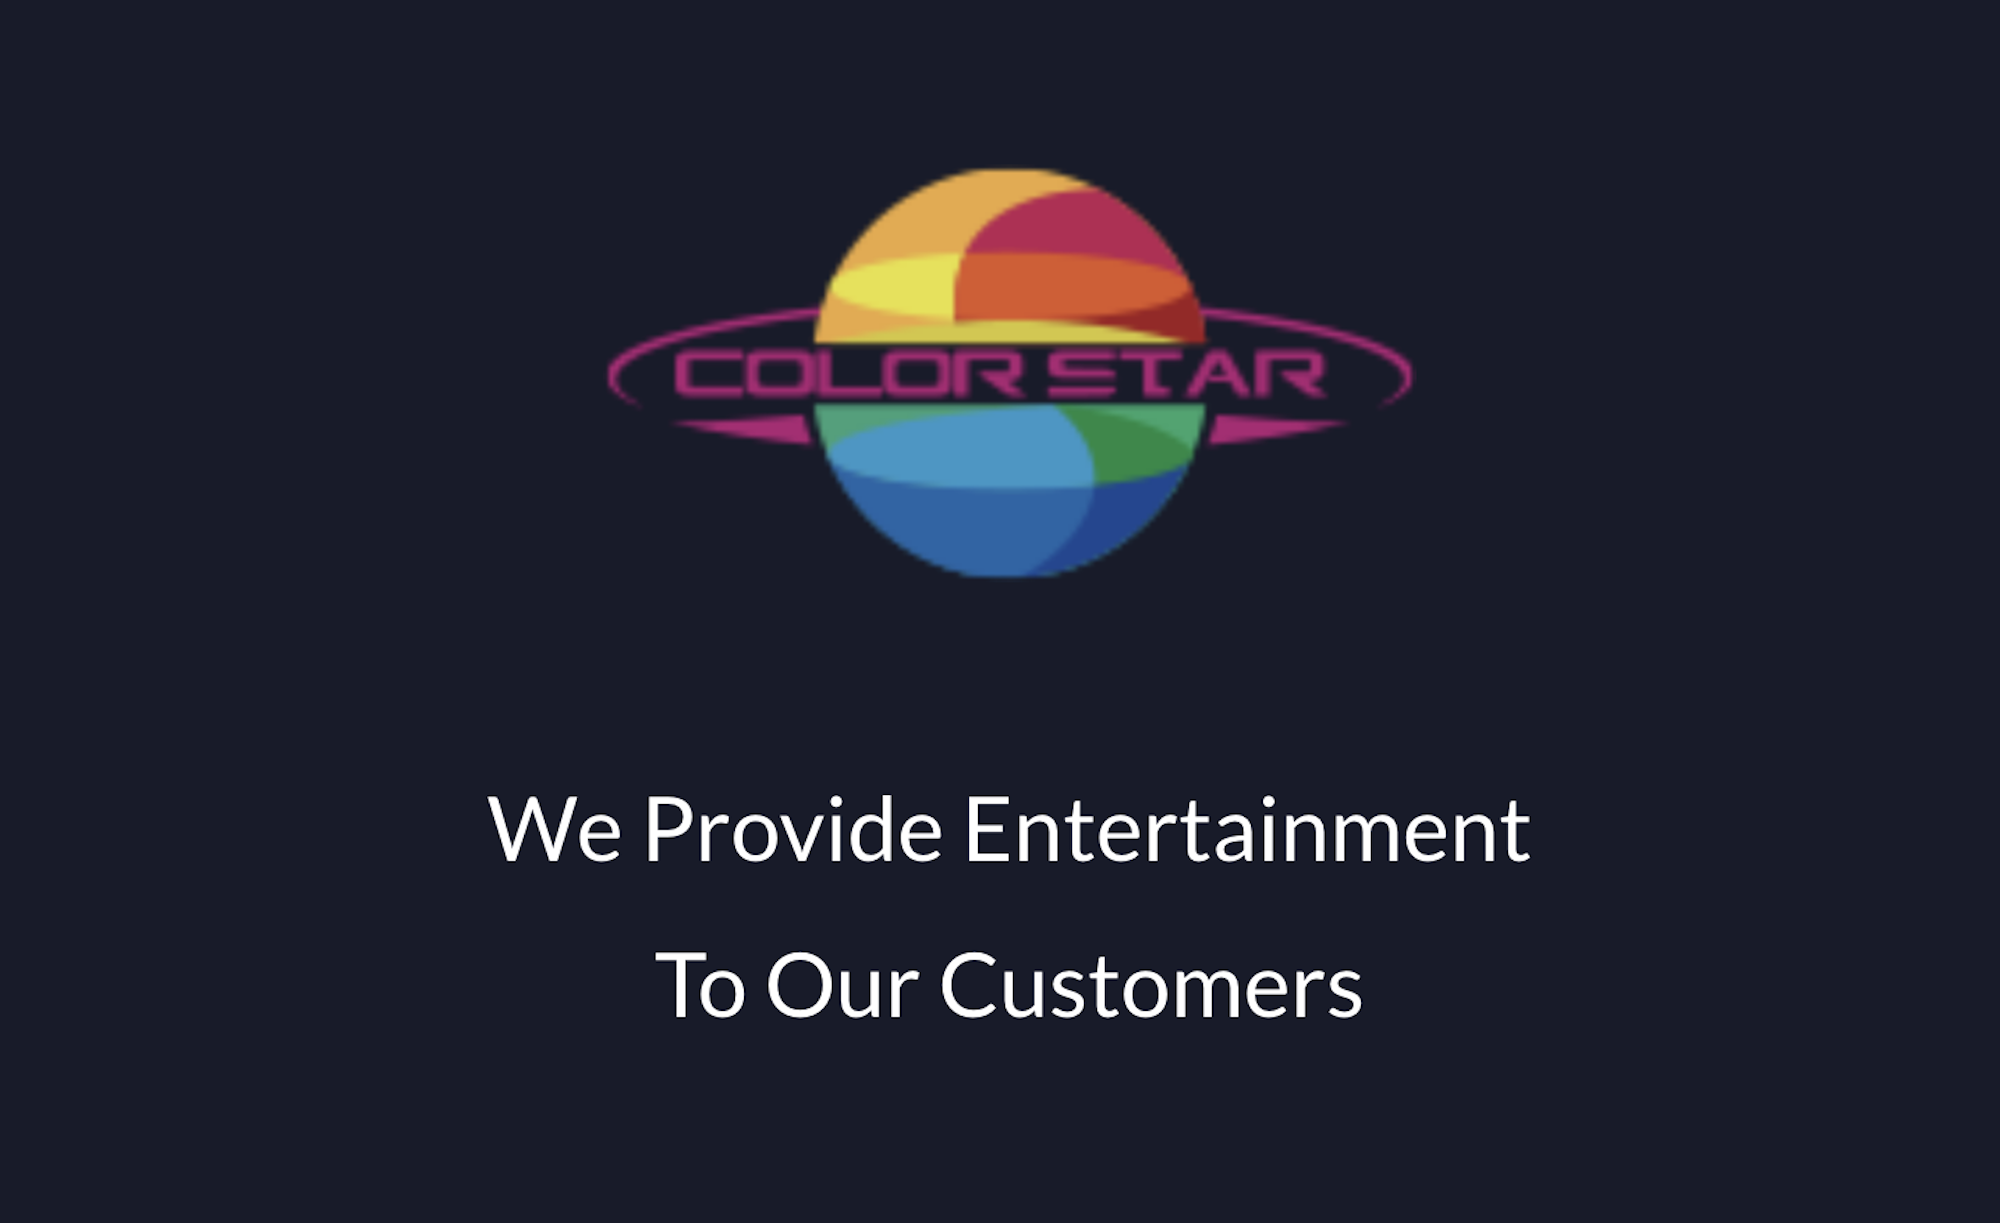 A Color Star logo over the phrase, "We Provide Entertainment To Our Customers"